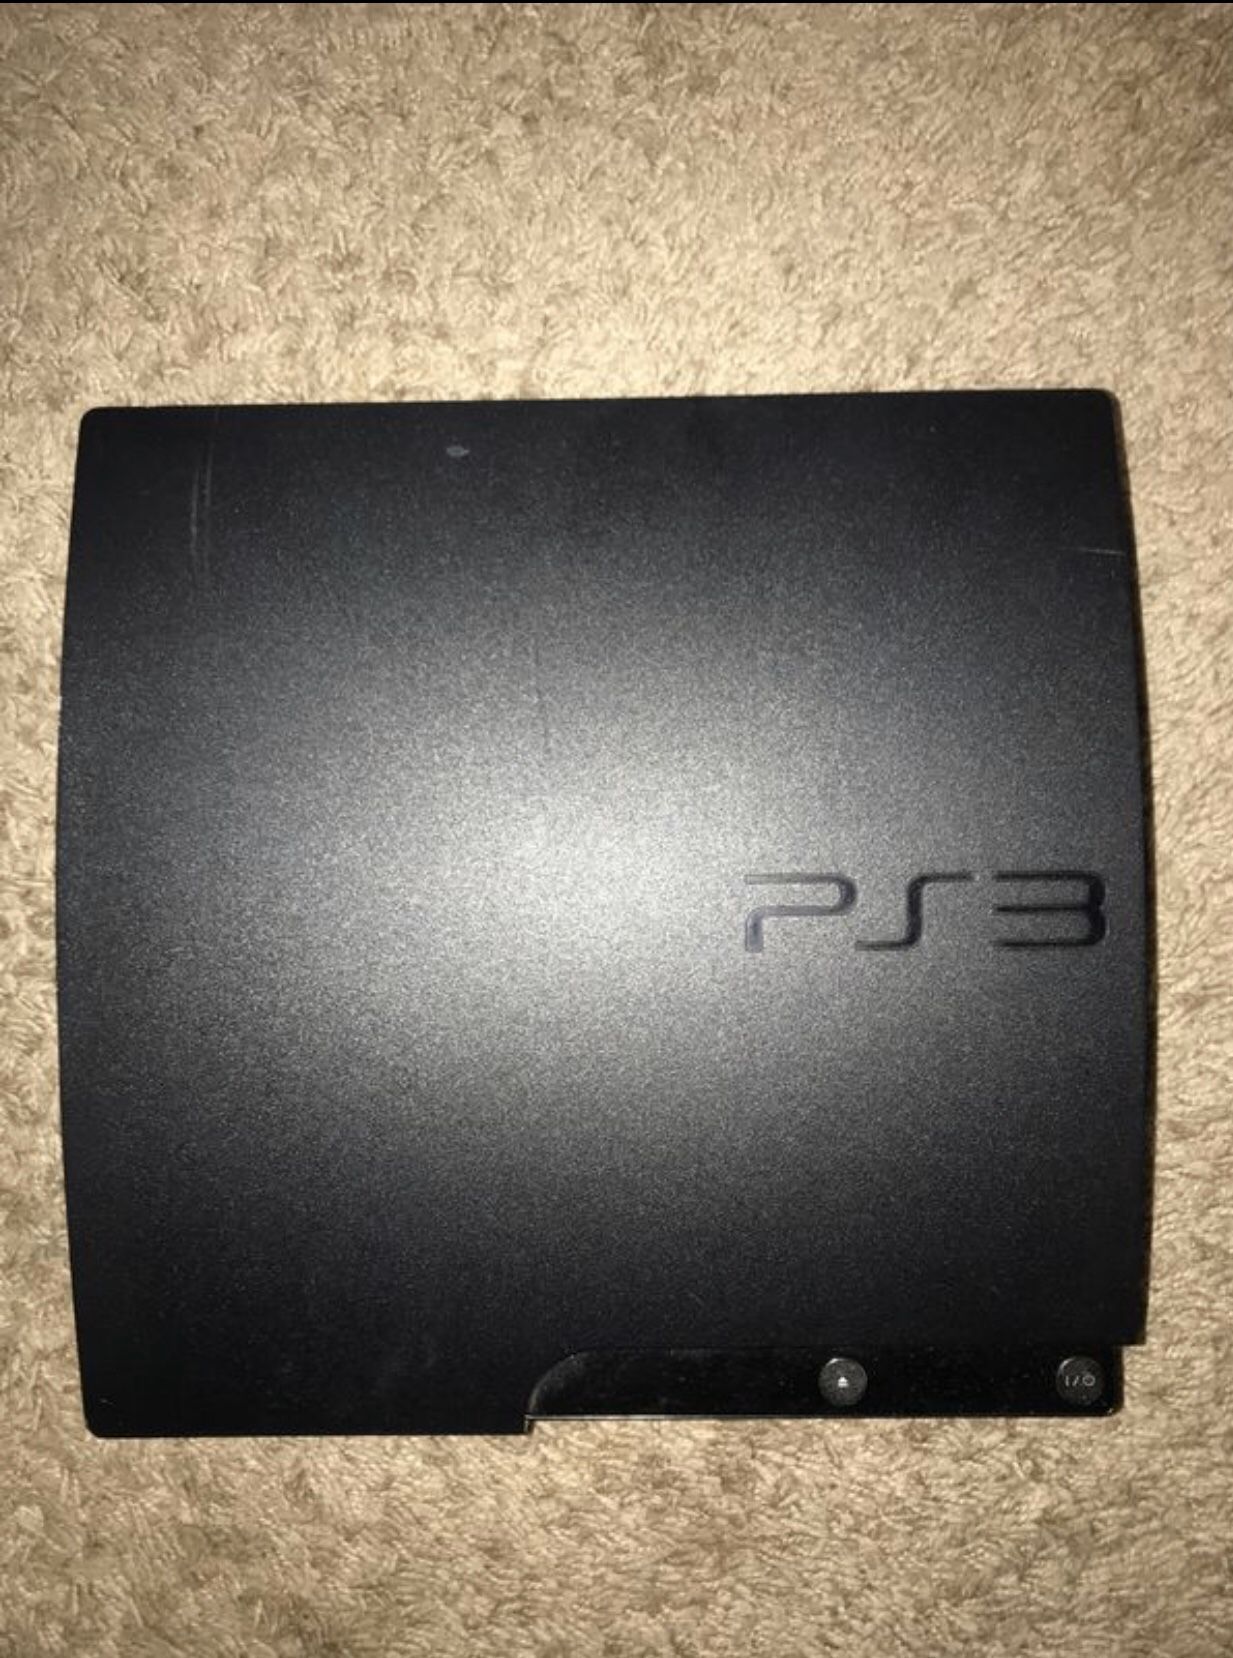 PS3 System